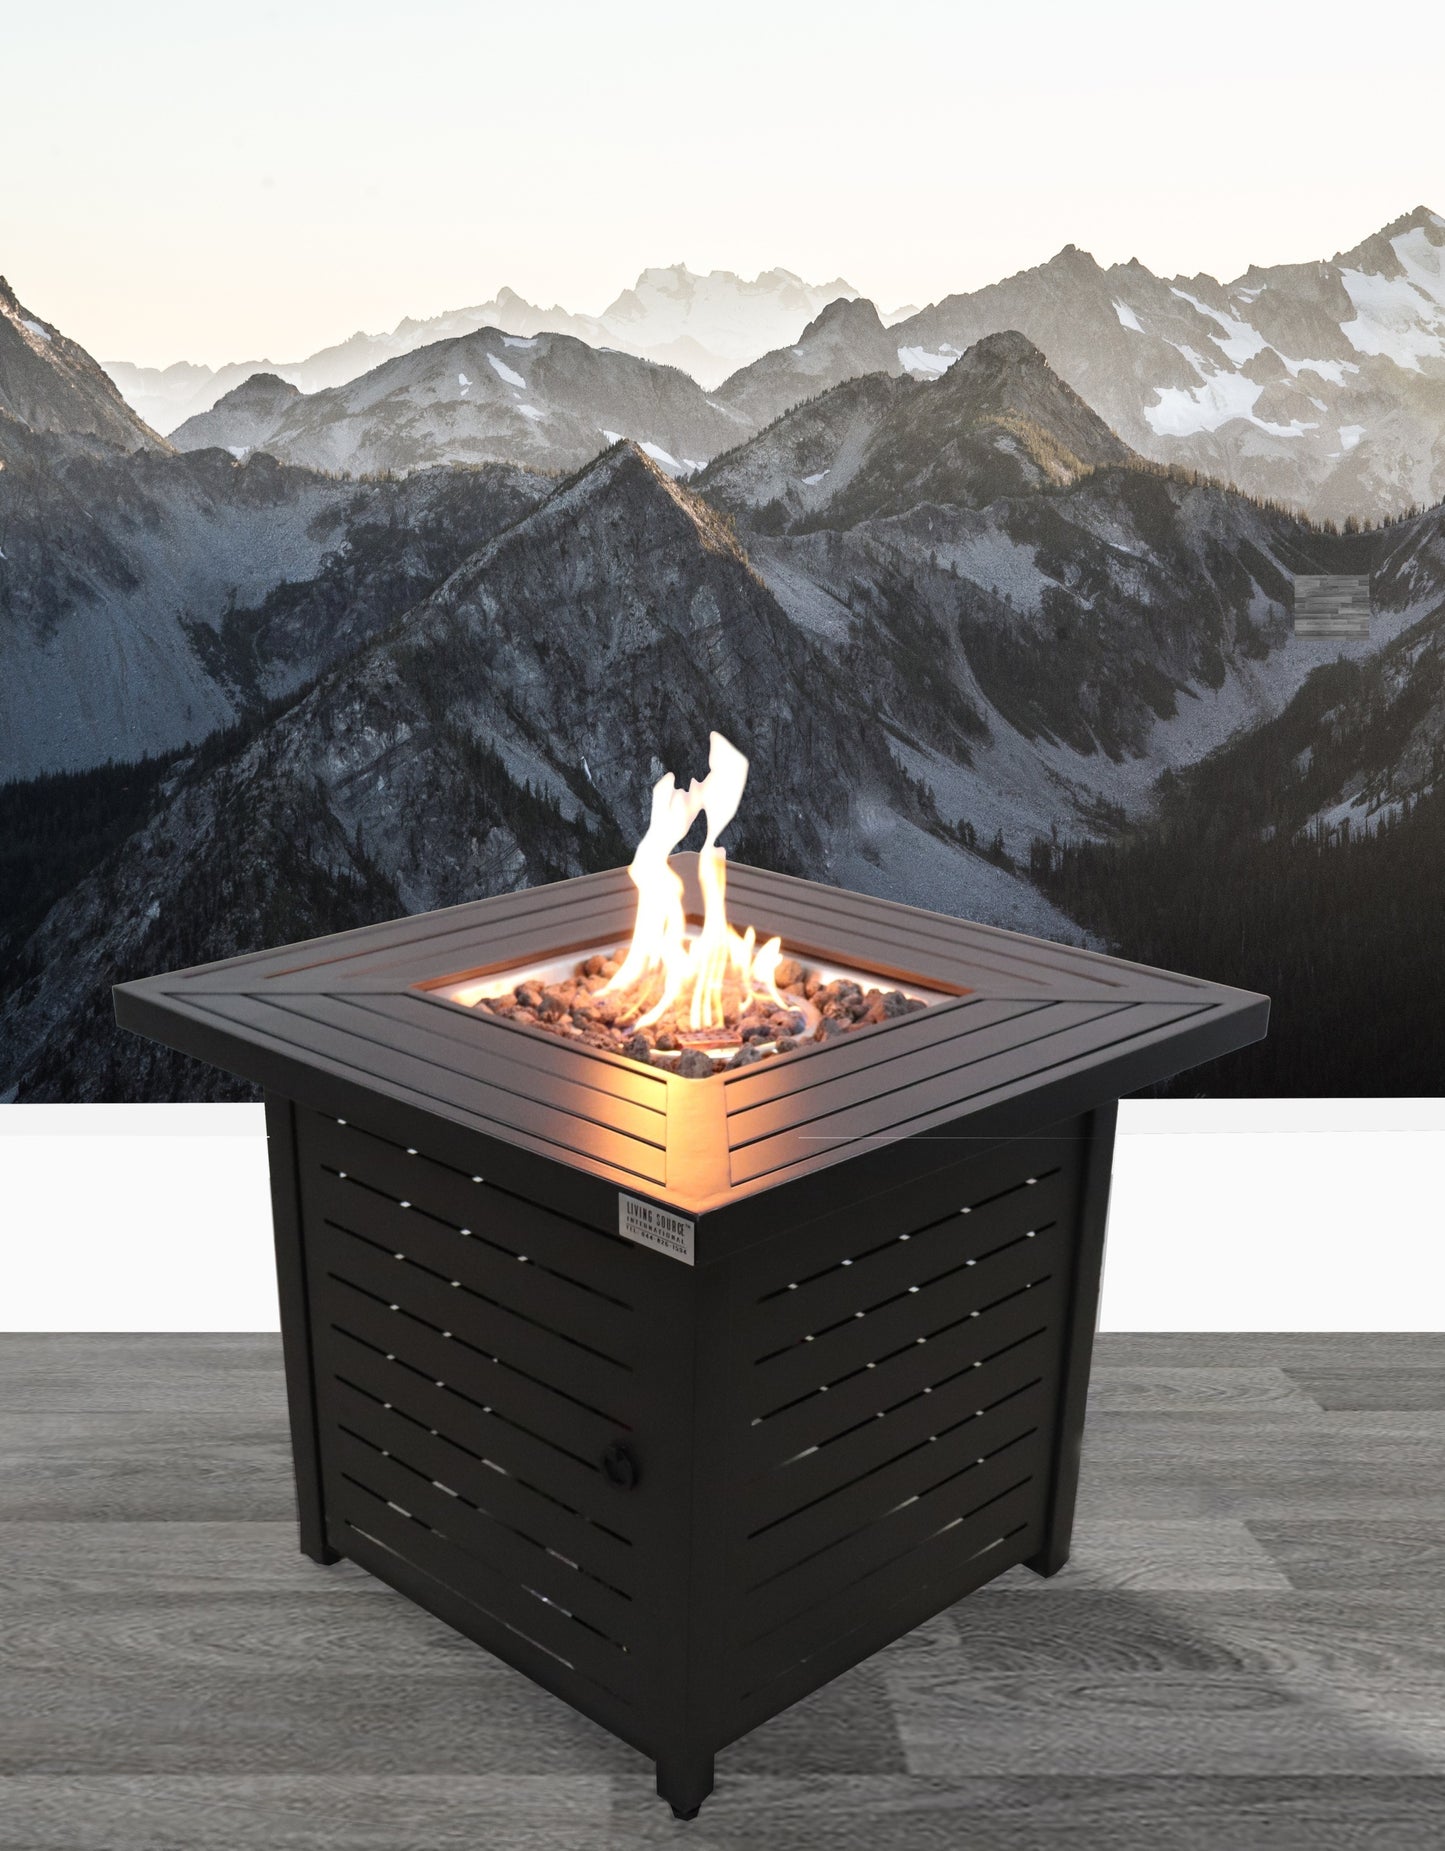 Steel Outdoor Fire Pit Table with Adjustable Flame - 30 x 30